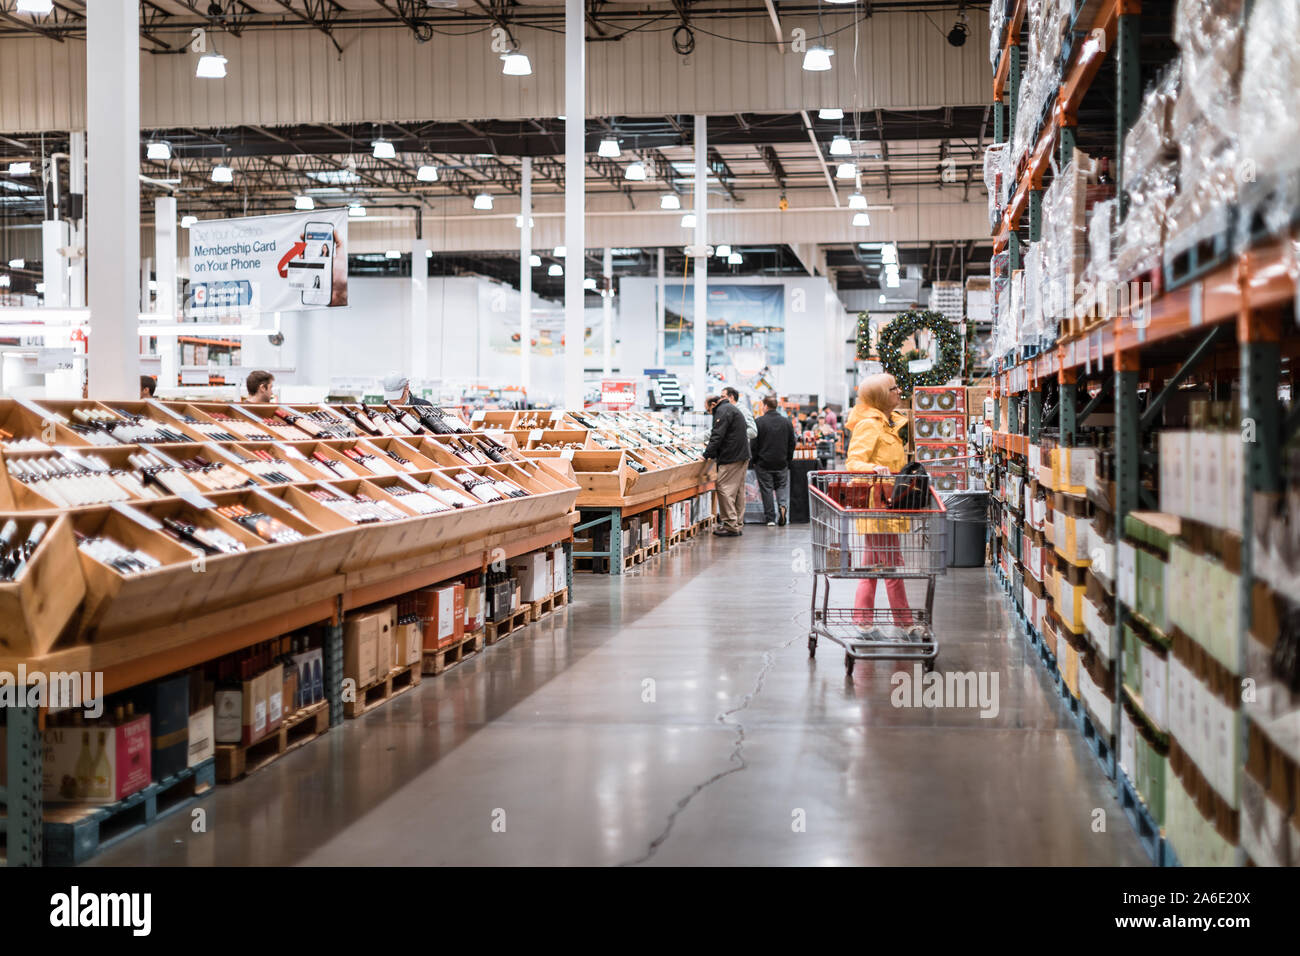 Tigard, Oregon - Oct 25, 2019 : Costco wholesale warehouse shopping aisle for wine and drink Stock Photo